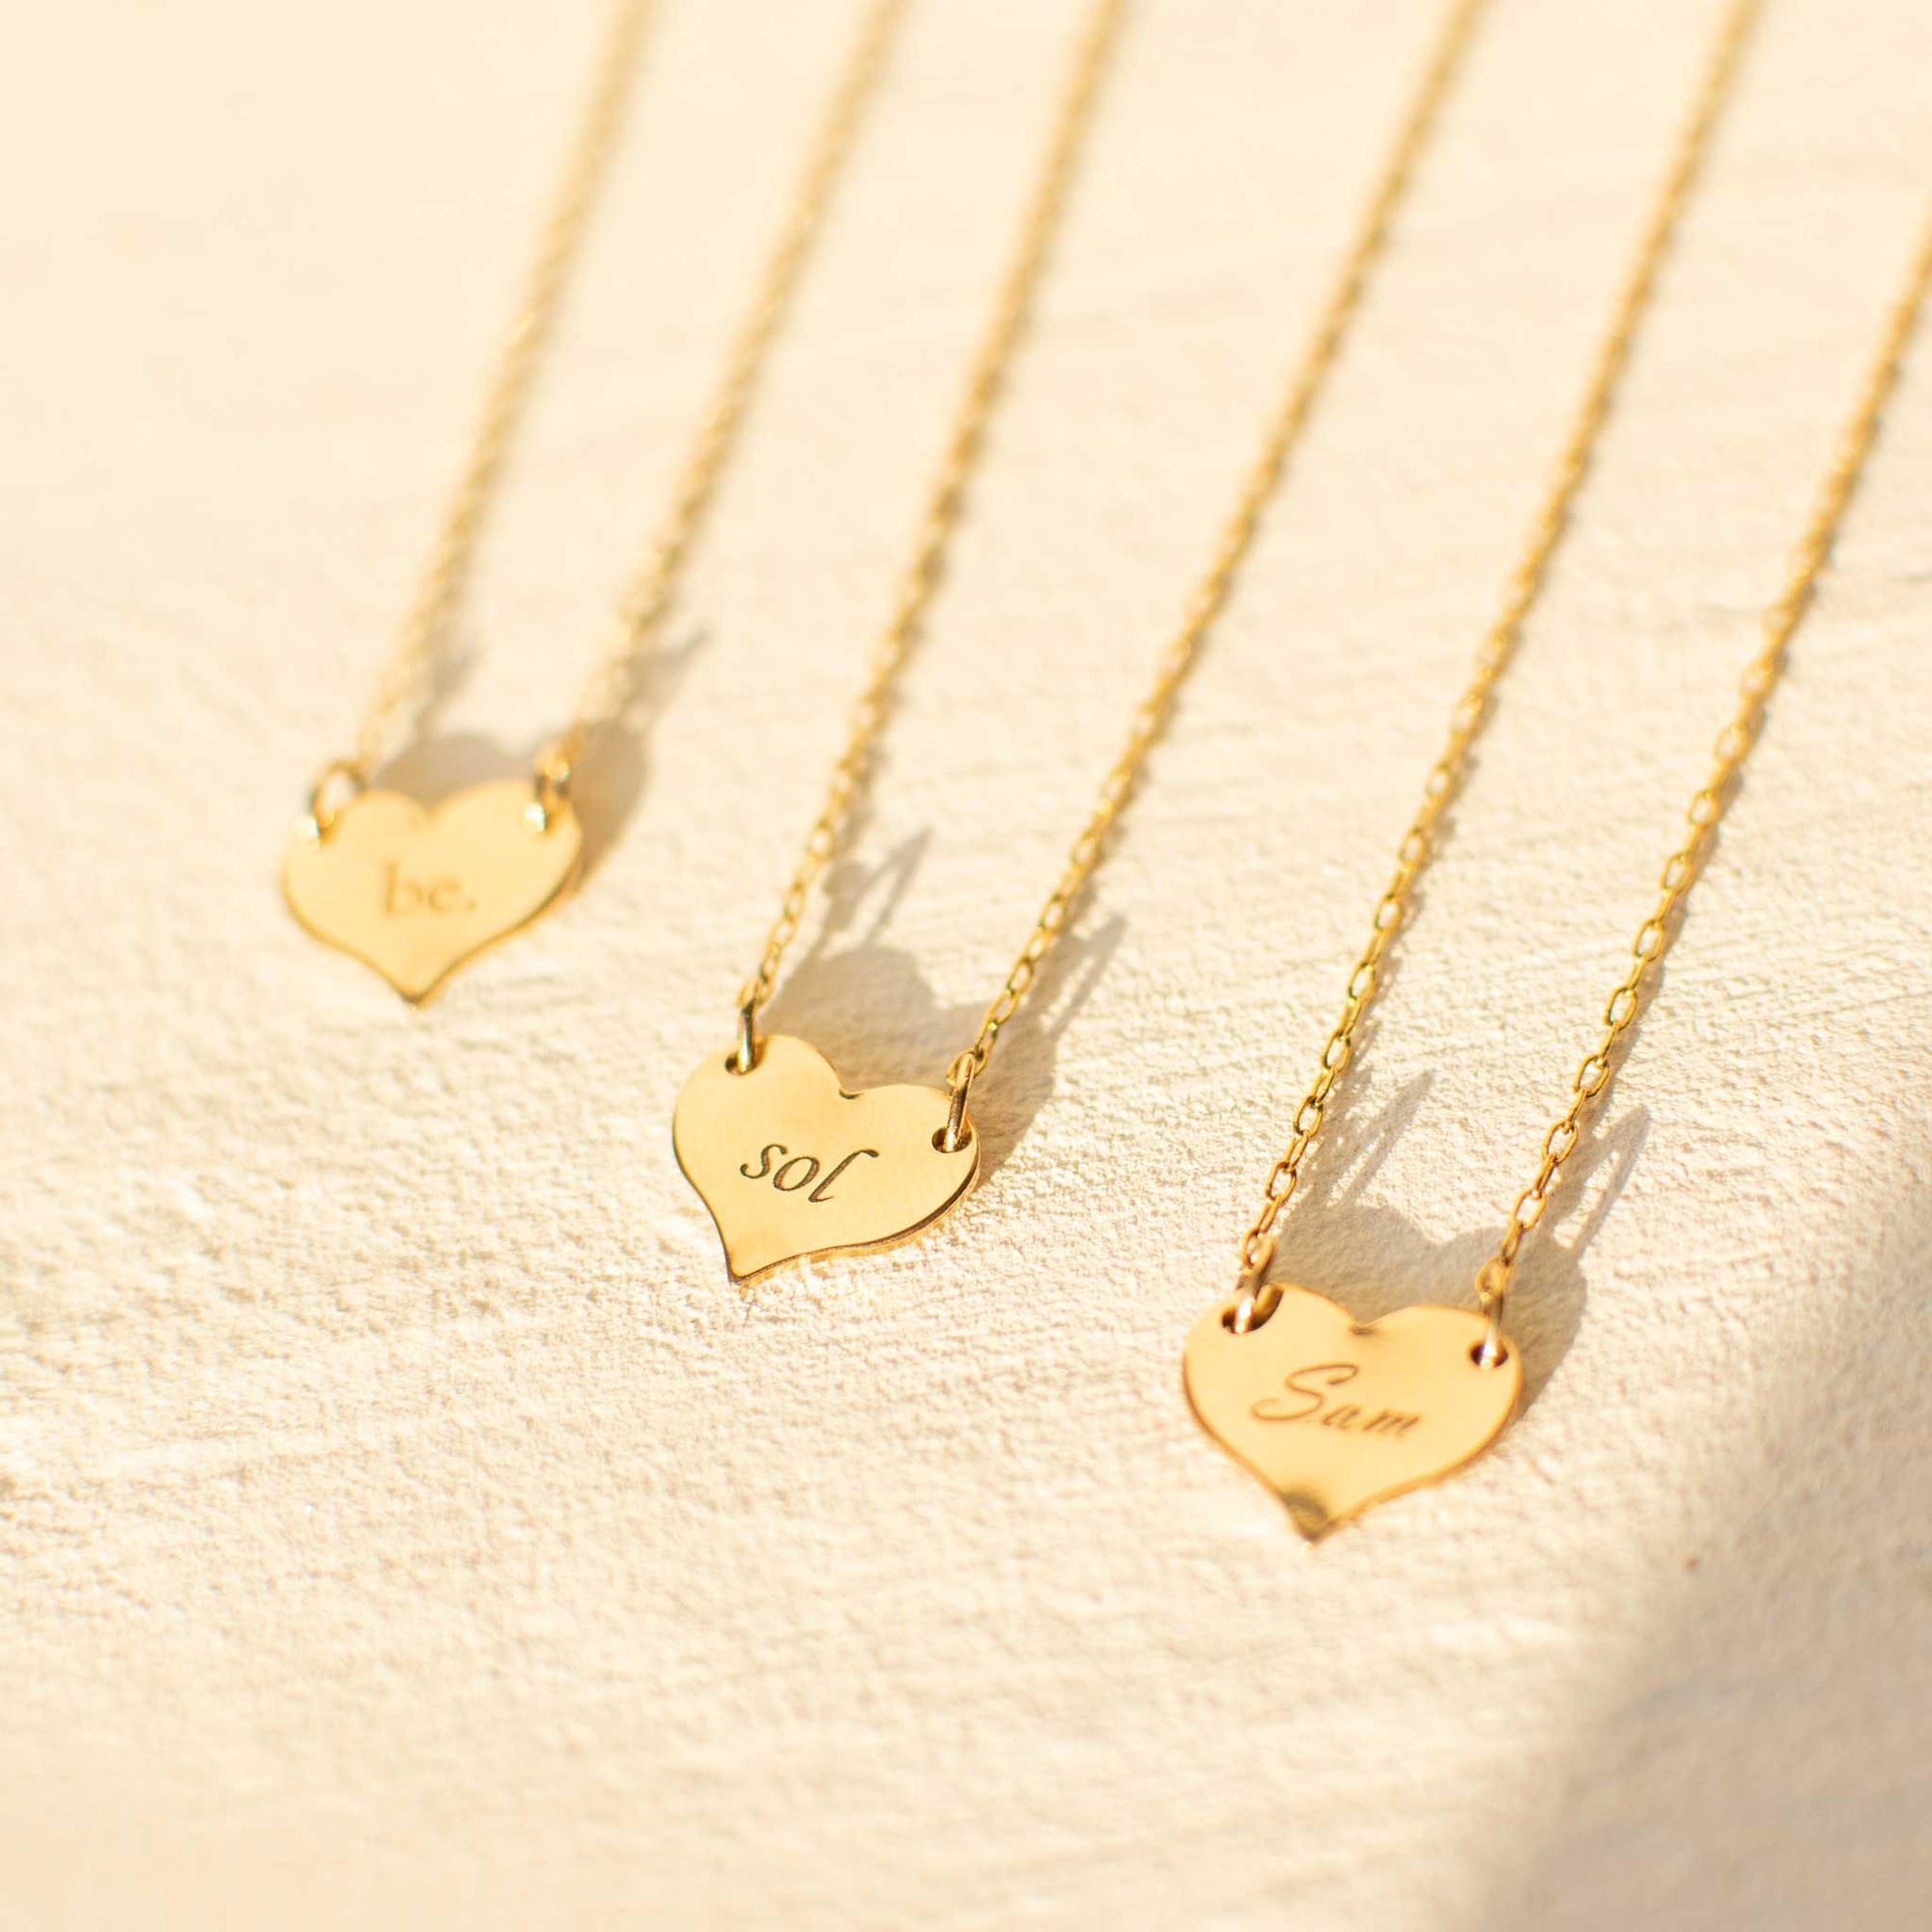 Three gold heart pendants are laying against a white texture board. The left heart is out of focus and has be with a period engraved in the ol' serif font. The middle heart is in focus and has sol engraved in the corsiva font. The right heart has Sam engraved in the script font and is out of focus. 